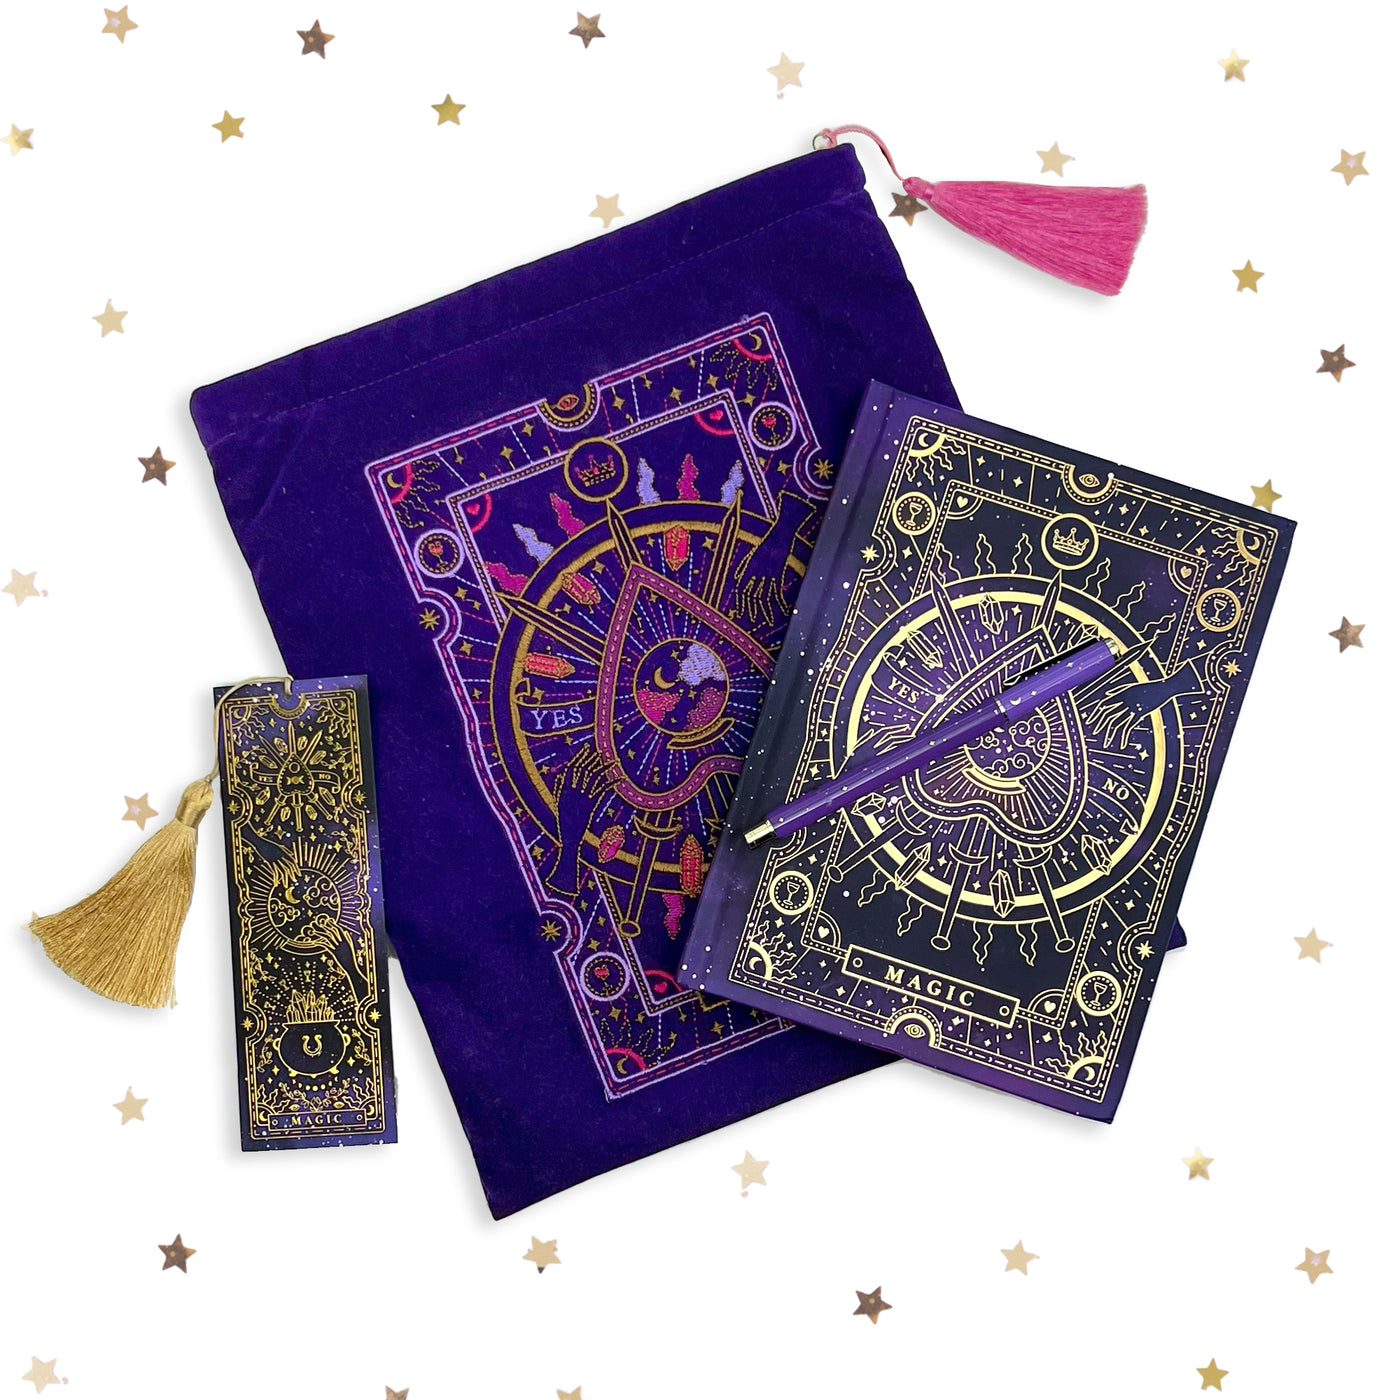 Magic Tarot Stationery Bundle - Bookmark - Book Sleeve - iPad Sleeve - Kindle Sleeve - Journal - Notebook - Pen - The Quirky Cup Collective